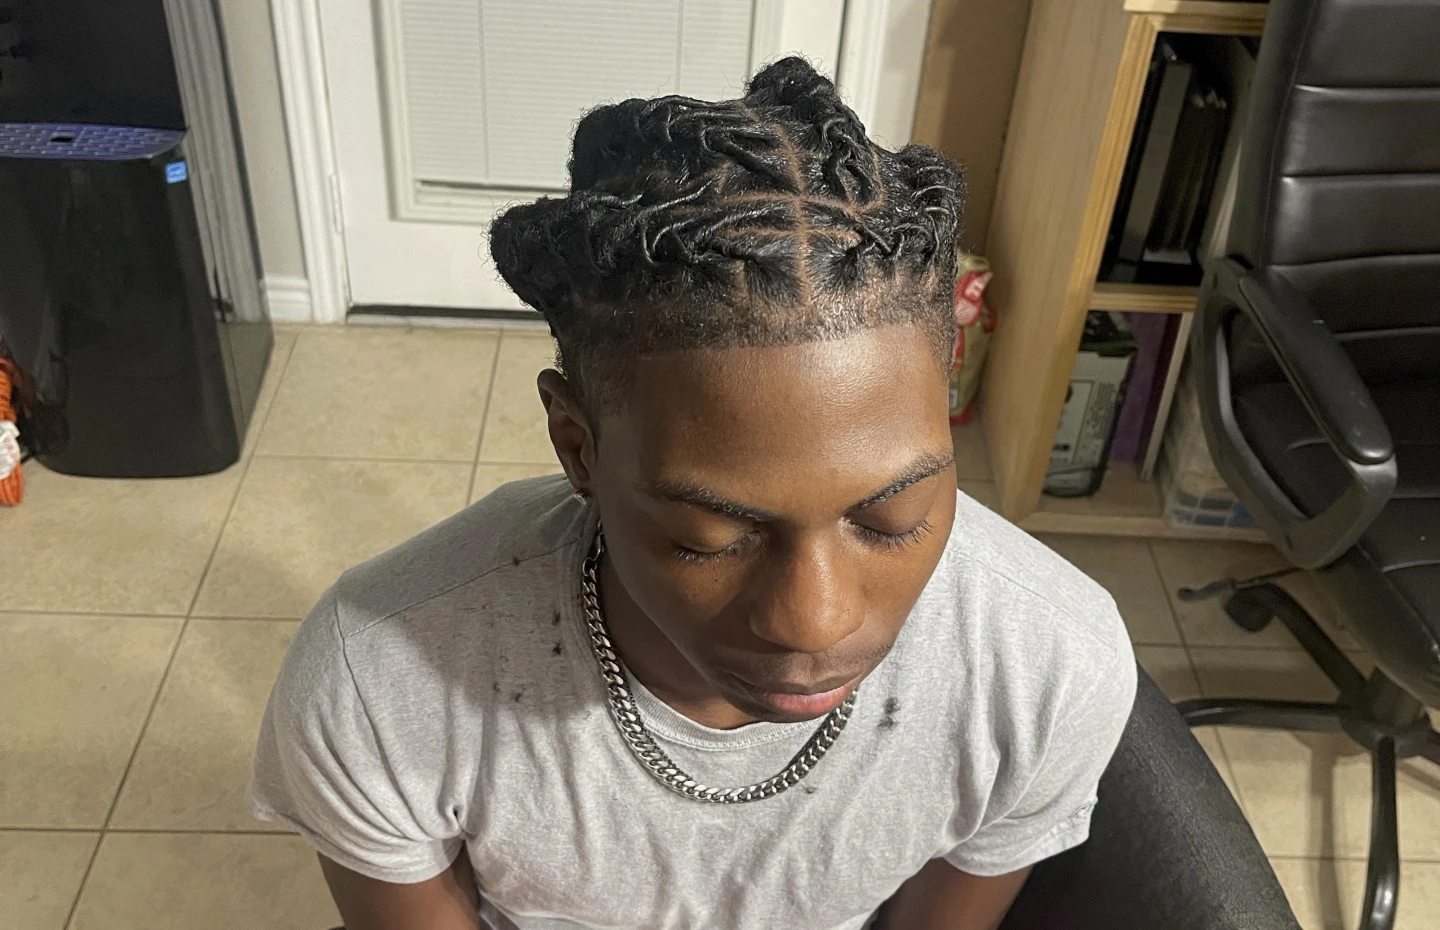 A Black student was suspended for his hairstyle. The school says it wasn’t discrimination